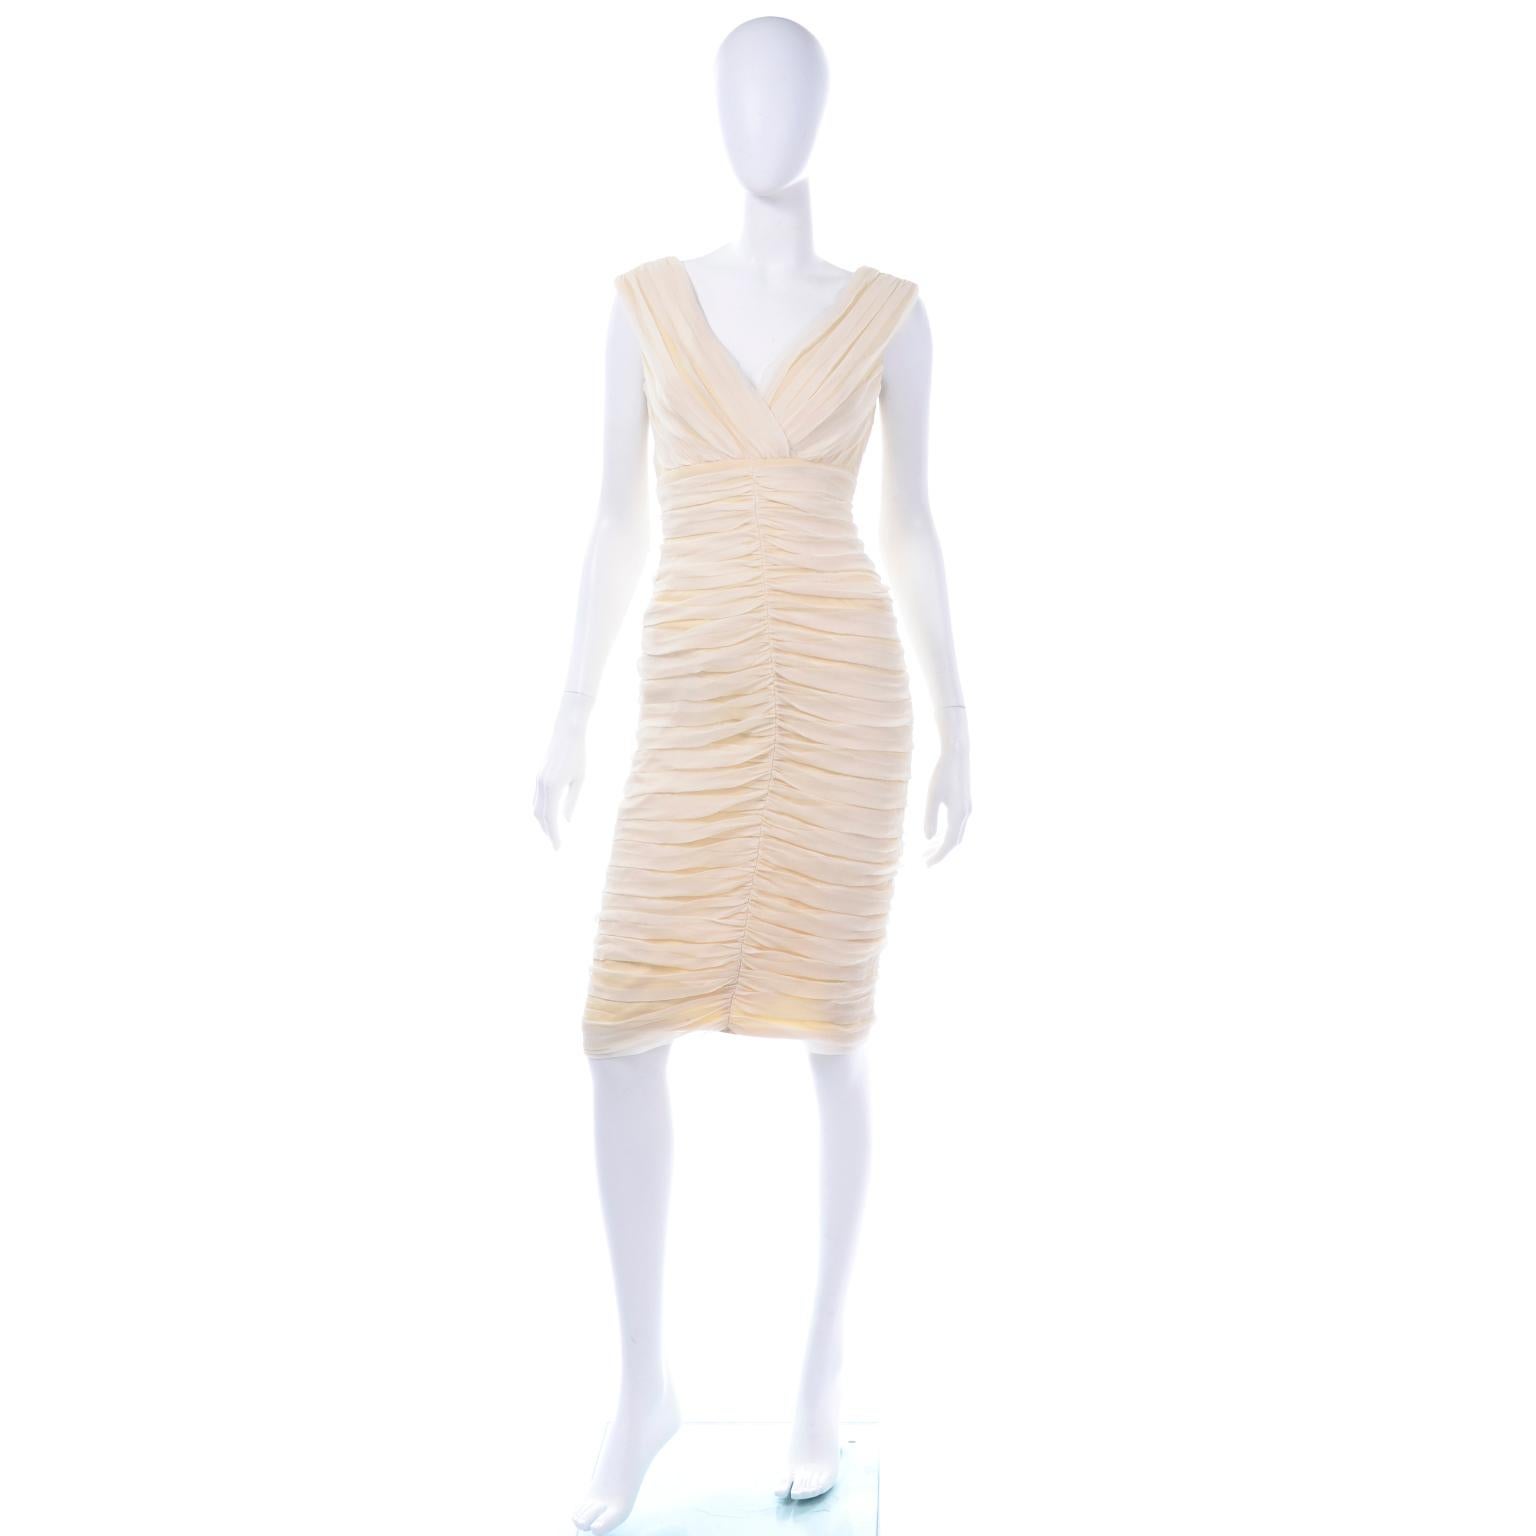 This cream silk ruched sleeveless dress from Tadashi is so lovely! The silhouette makes this a very interesting and flattering evening dress. The cream color can really be worn year round when paired with the right accessories and shoes! We love